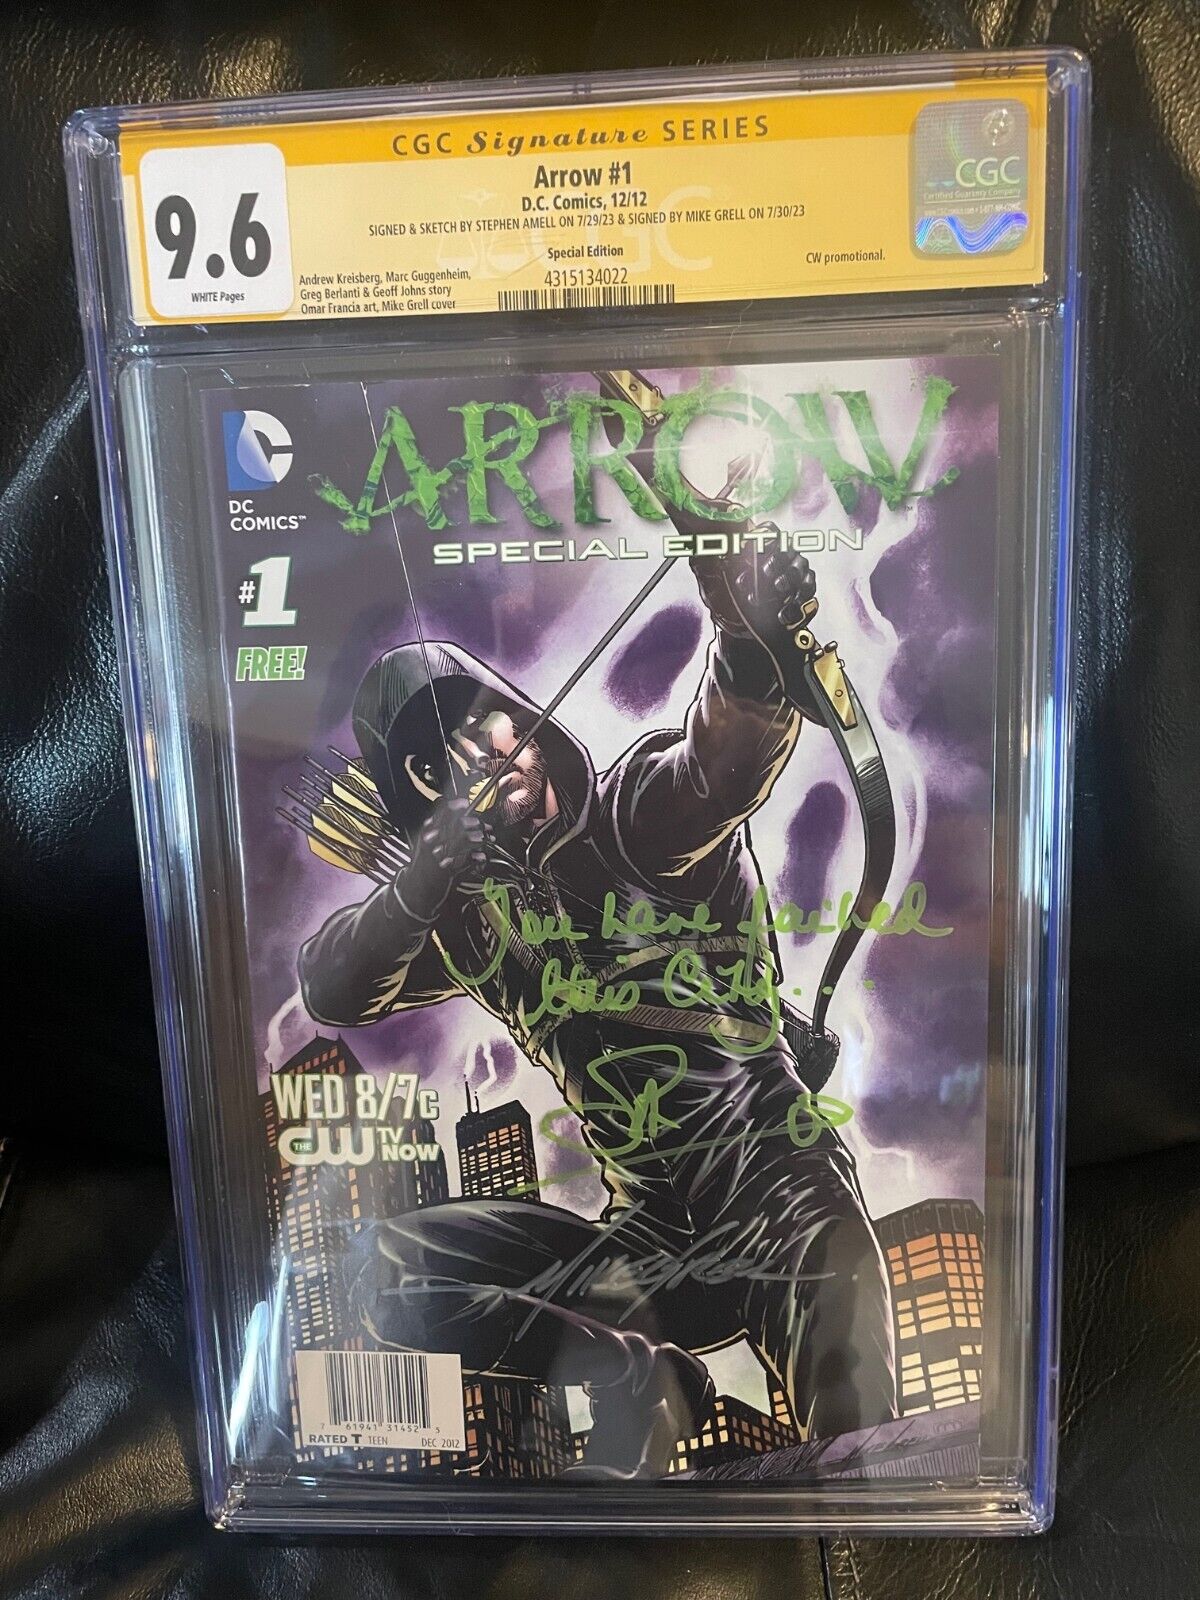 CGC SS 96 Arrow 1 Special Edition signed by Mike Grell Stephen Amell